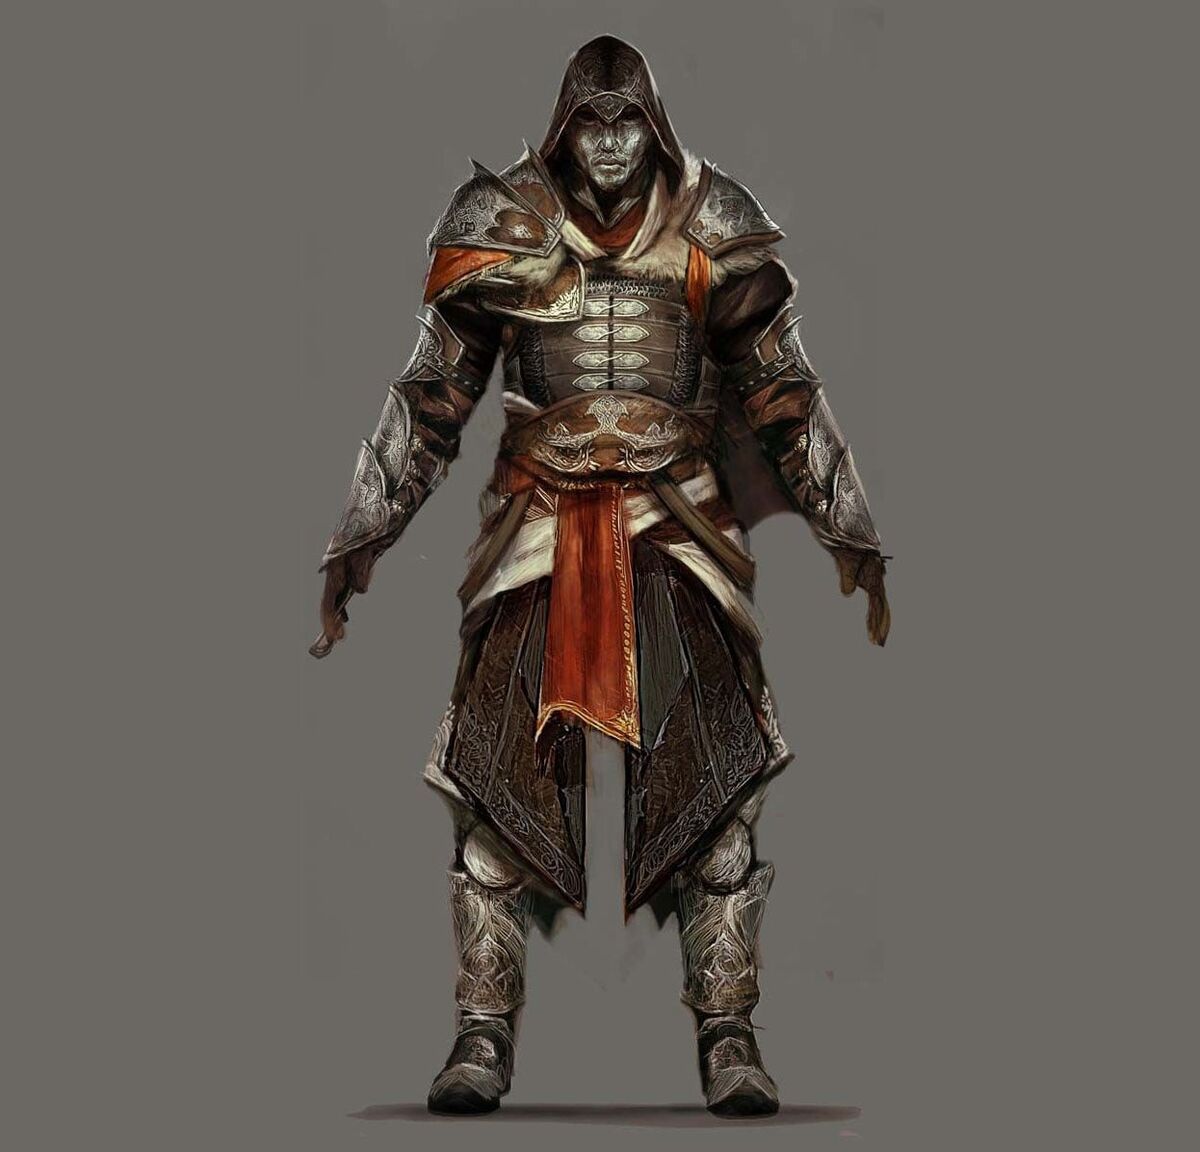 Assassins Creed 2 - Armor of Altair - Coolest suits of armor